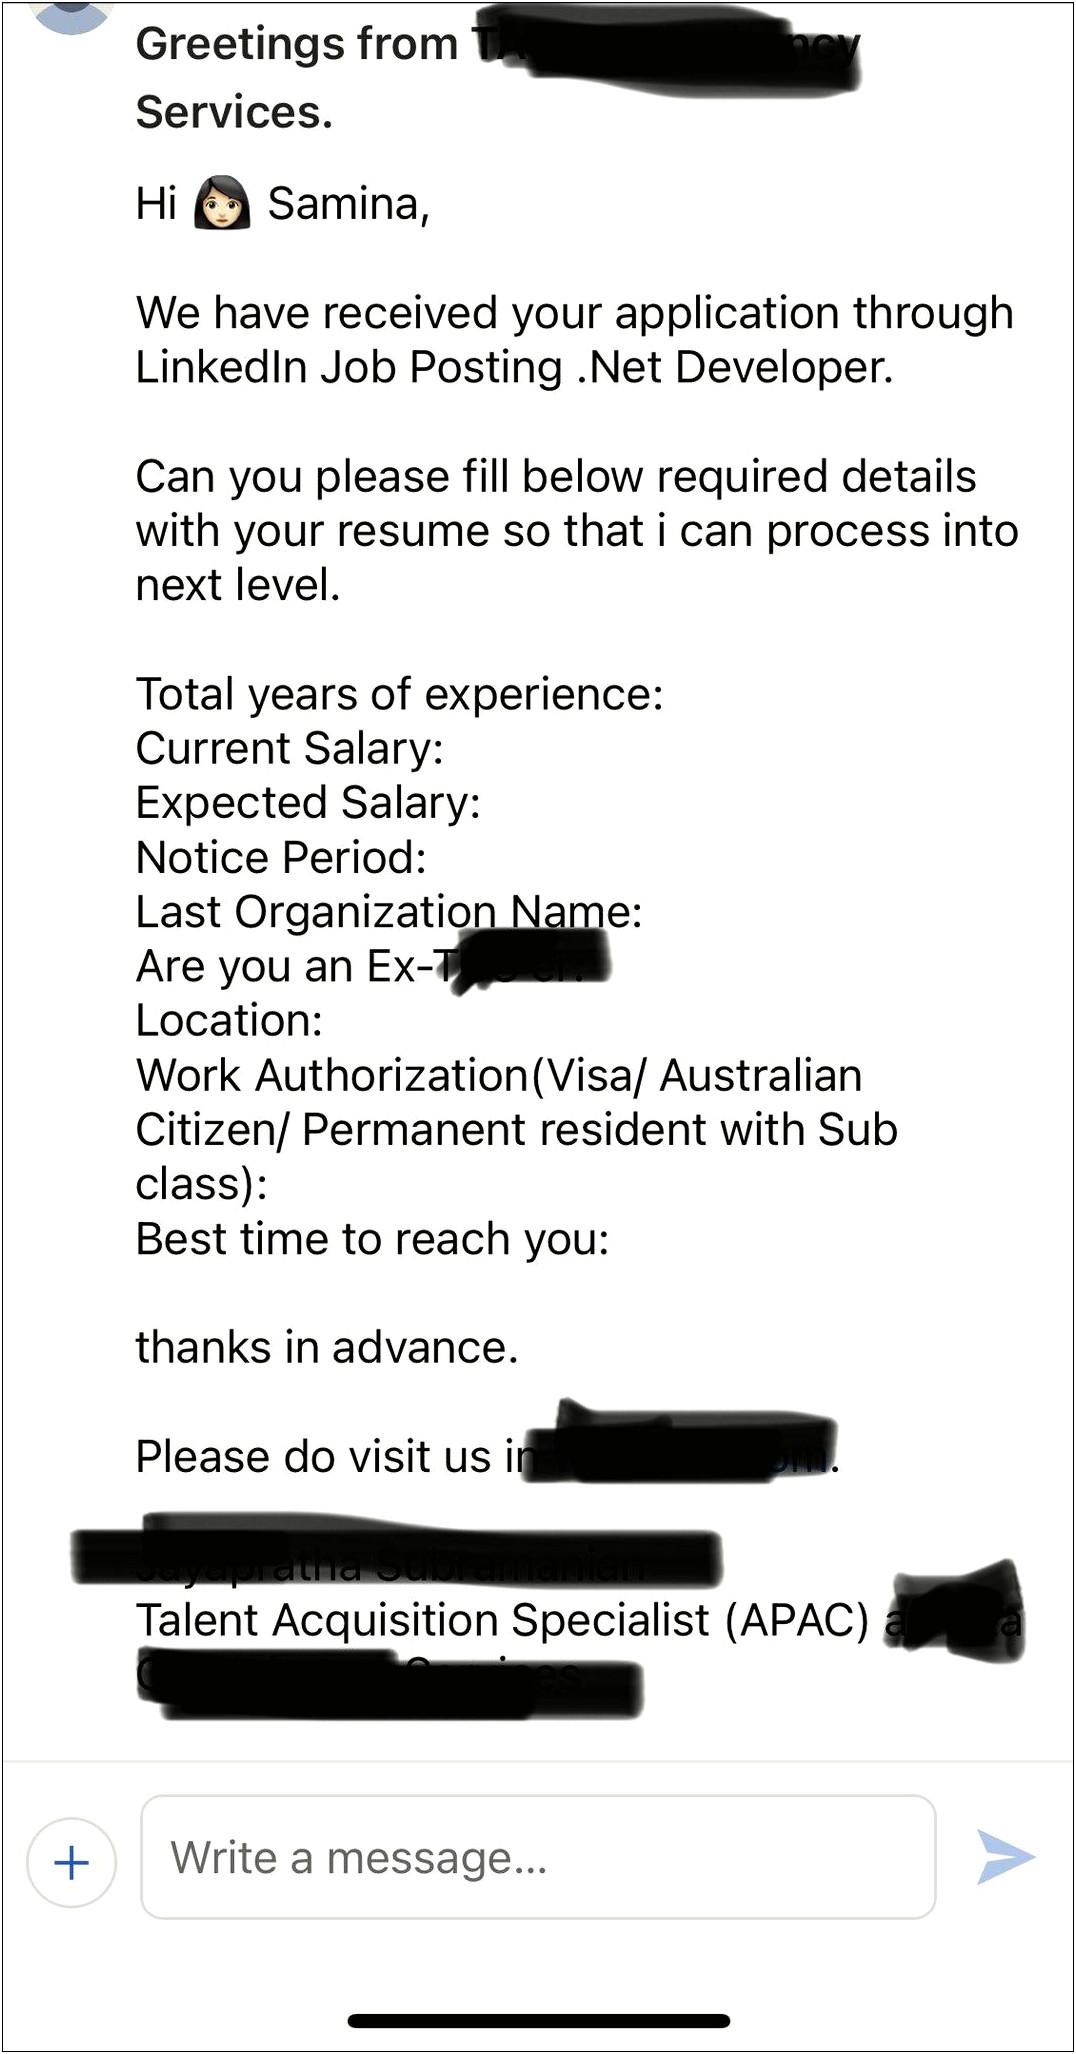 Where To Put Permanent Resident On Resume